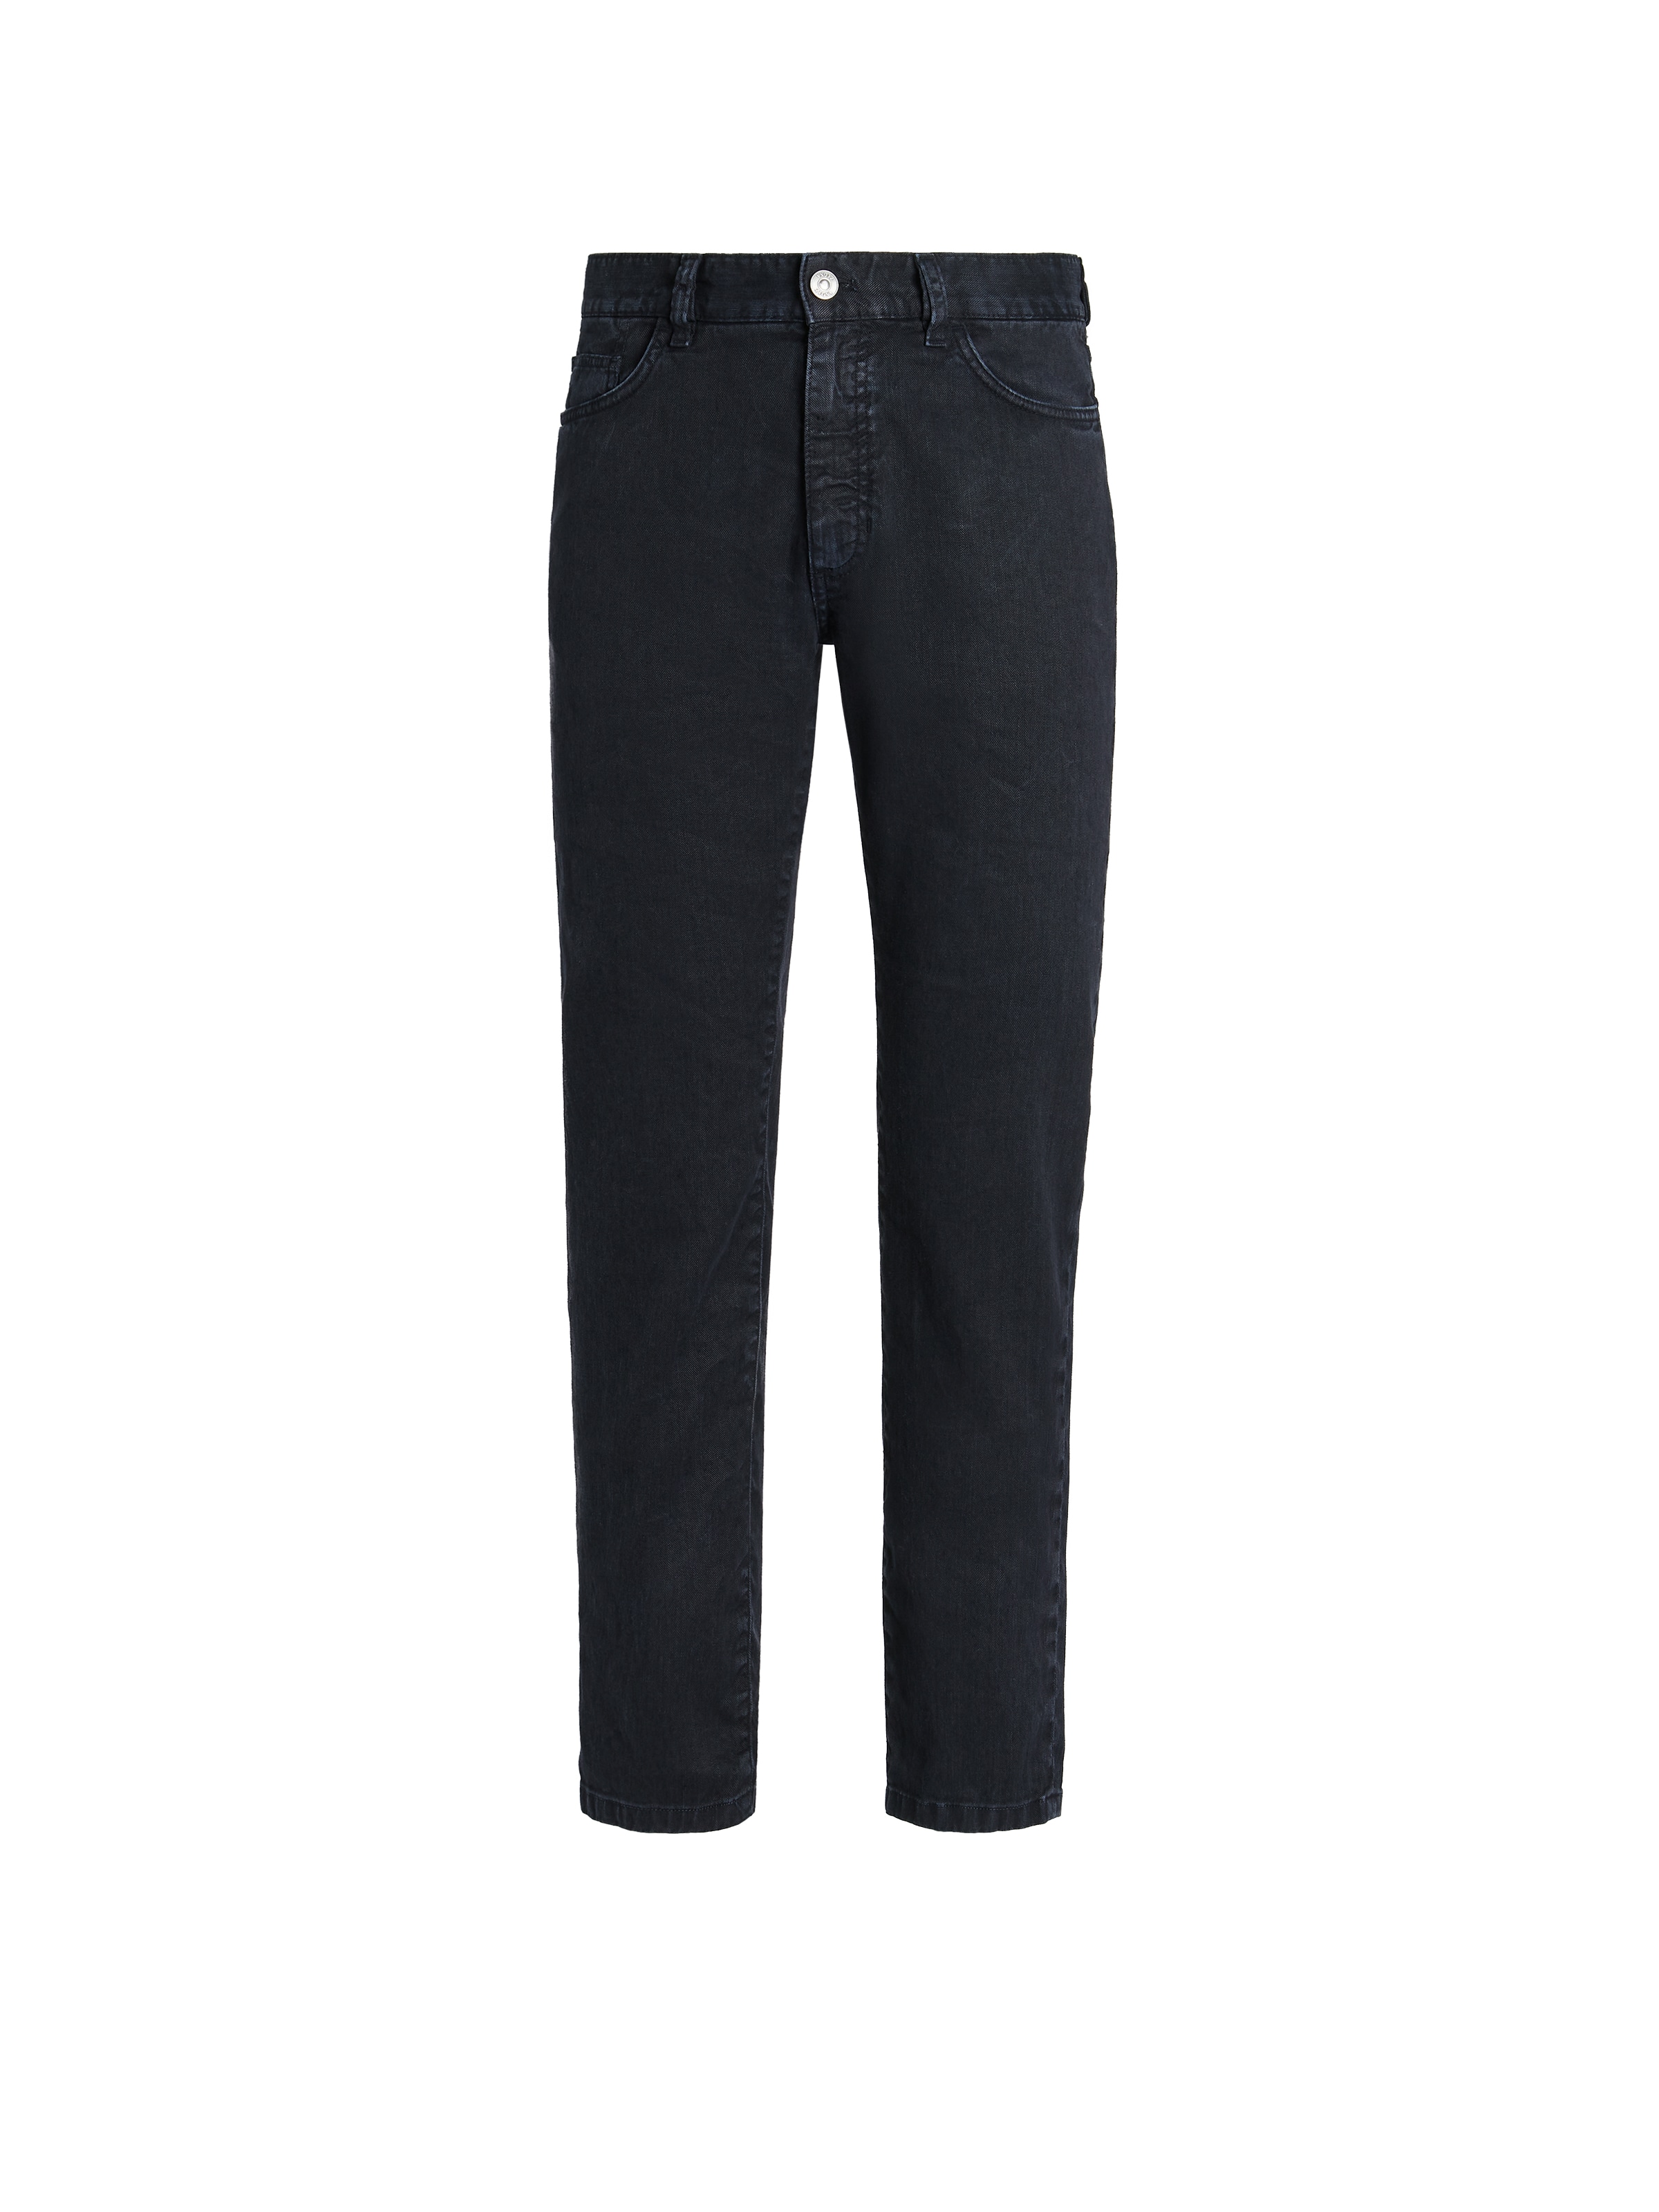 Zegna Navy Blue Stretch Linen And Cotton Jeans